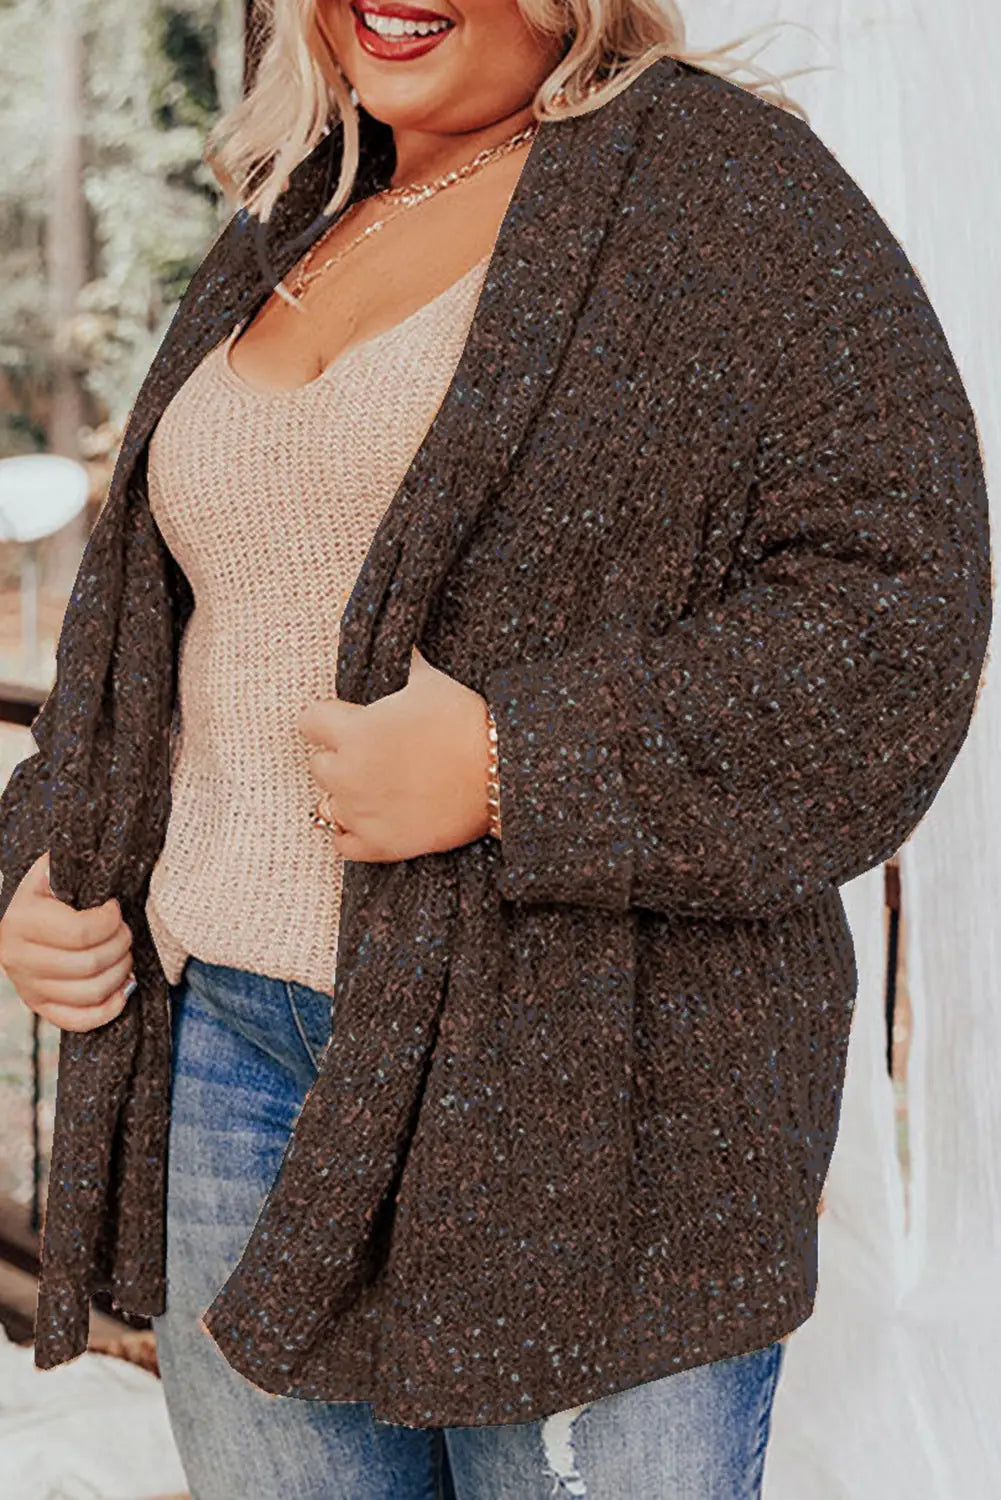 Chicory coffee open front knit plus size cozy cardigan - 1x / 100% polyester